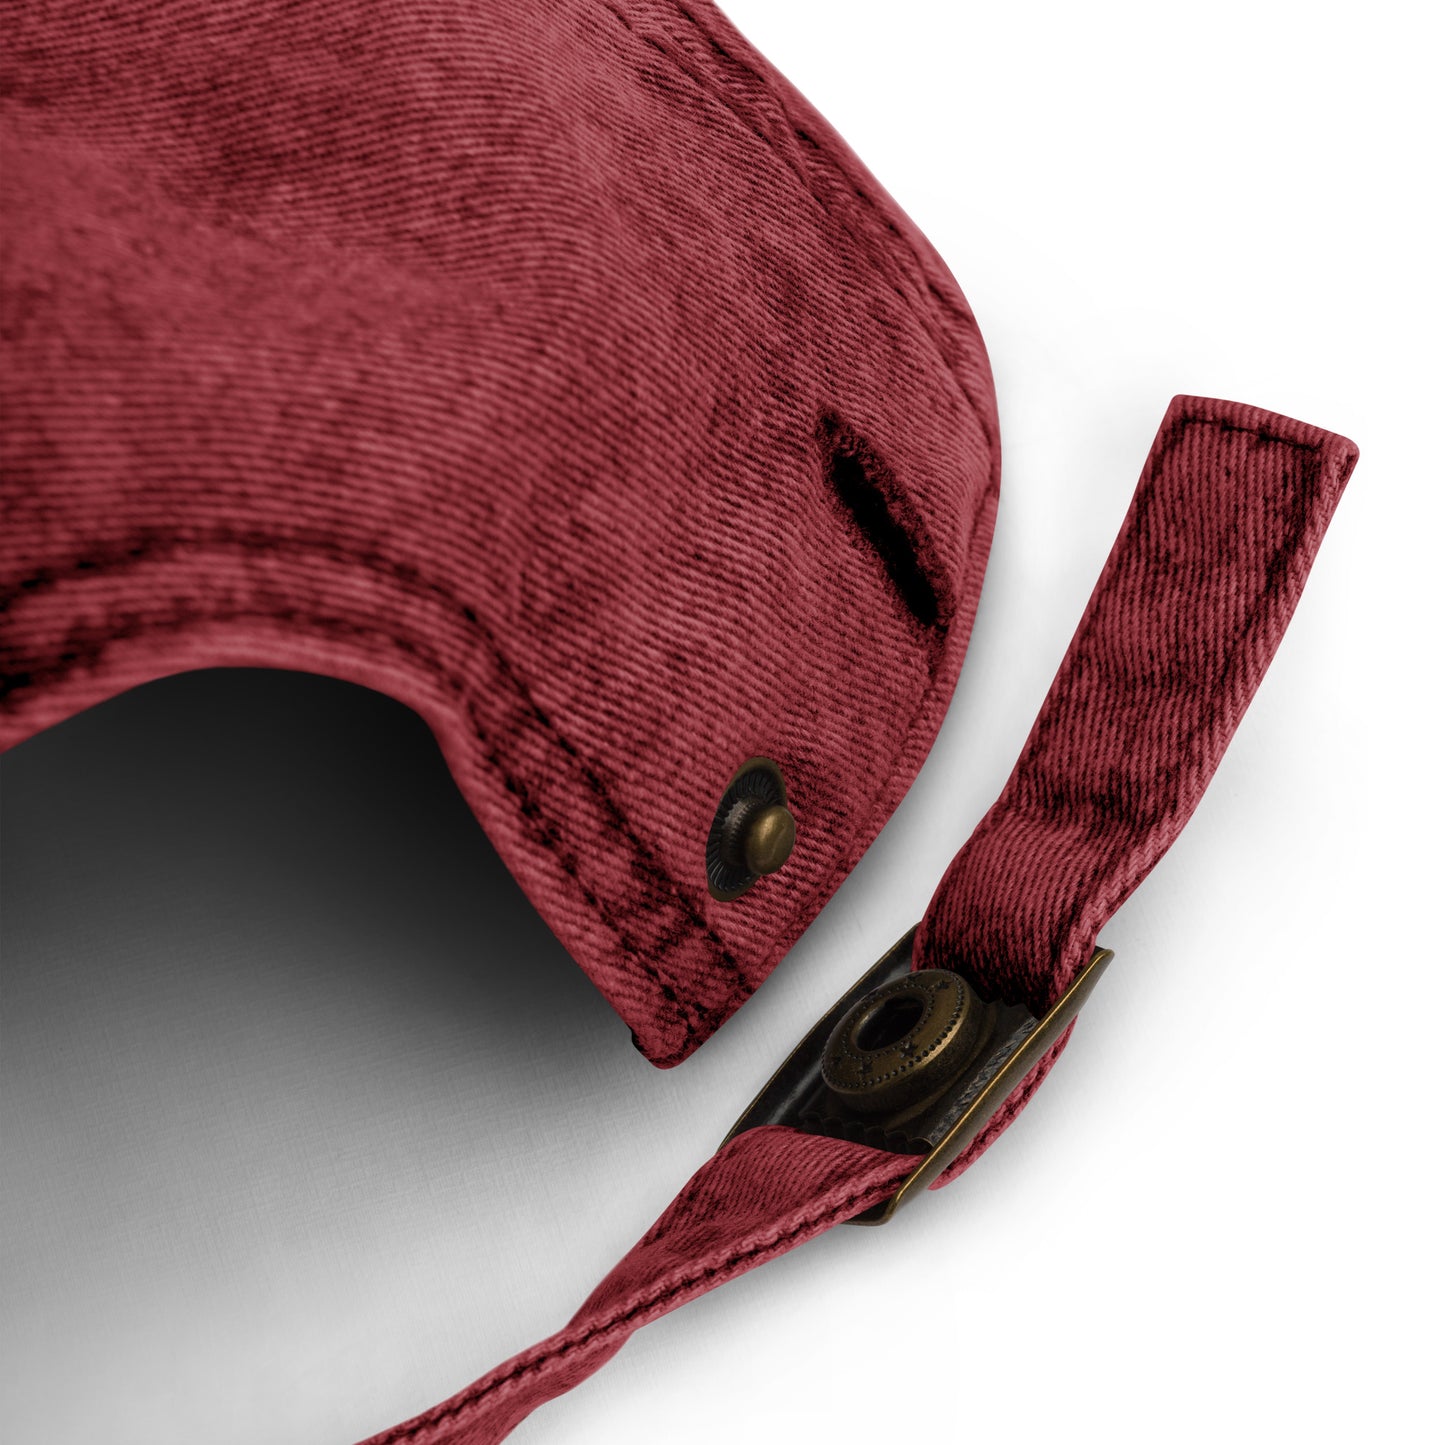 Maple Leaf Twill Cap - Red/White • YUL Montreal • YHM Designs - Image 07